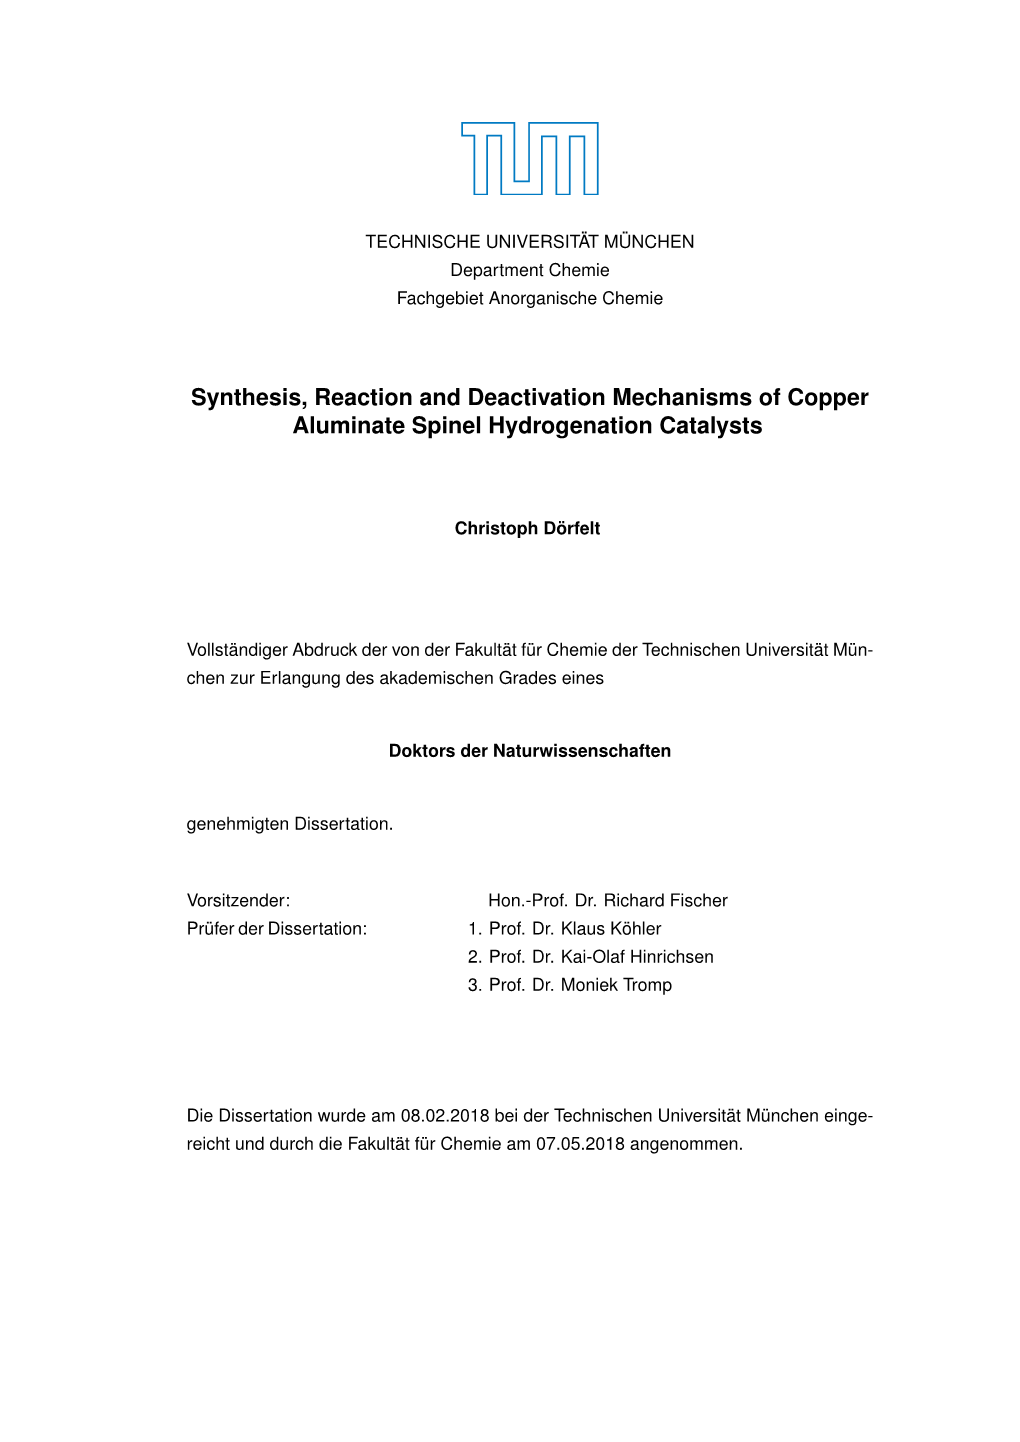 Synthesis, Reaction and Deactivation Mechanisms of Copper Aluminate Spinel Hydrogenation Catalysts